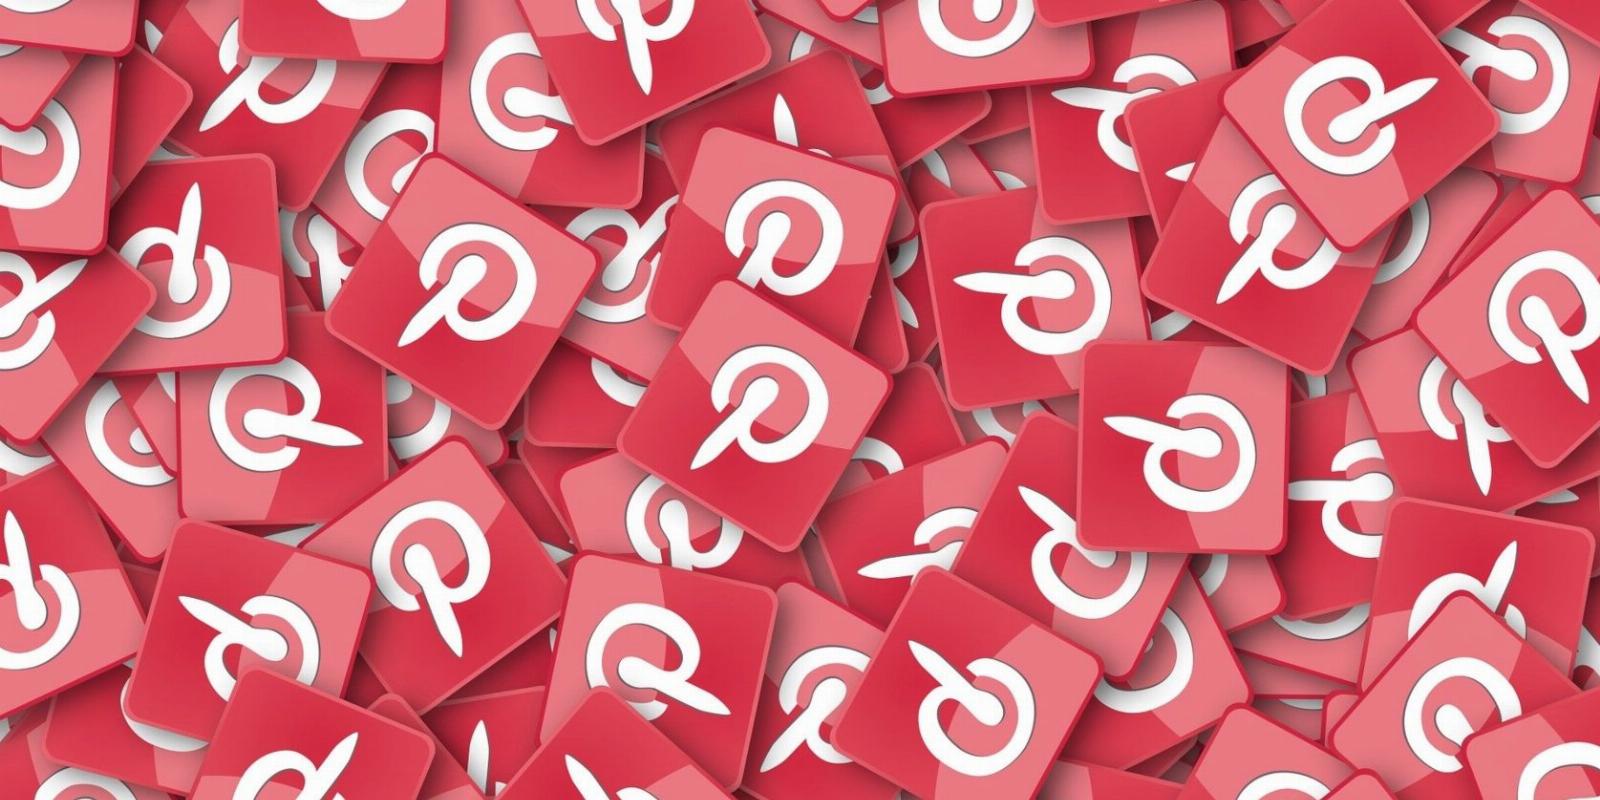 What Is Pinterest Predicts?